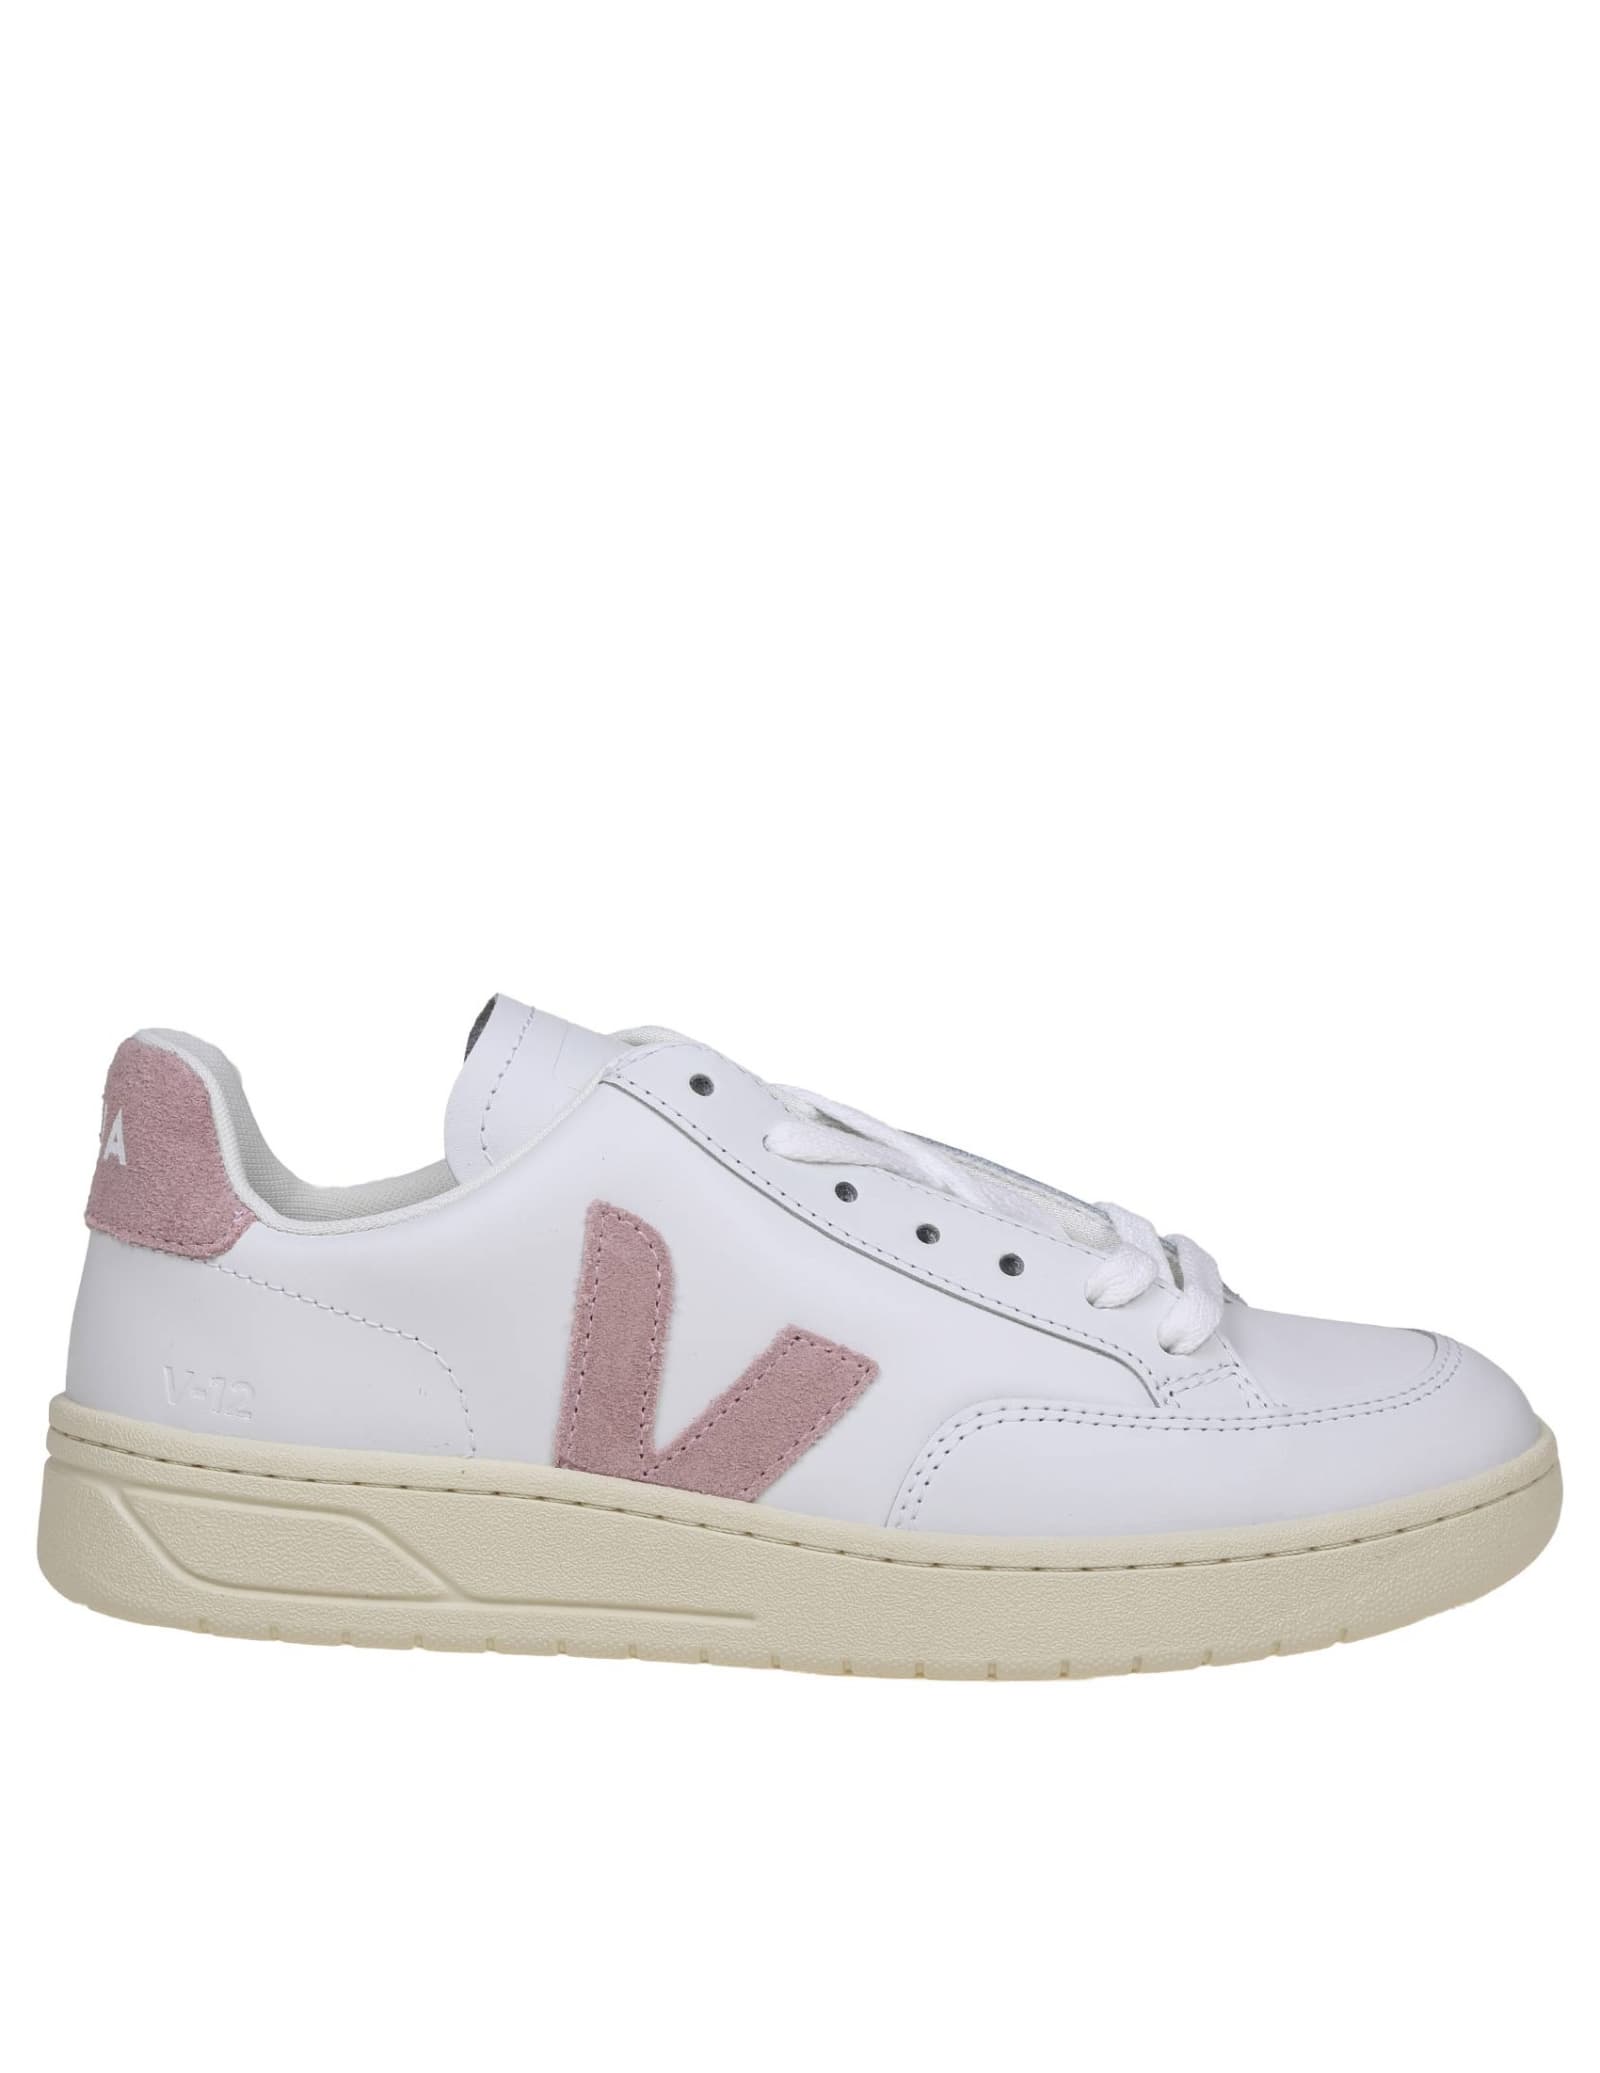 V 12 Sneakers In White/pink Leather